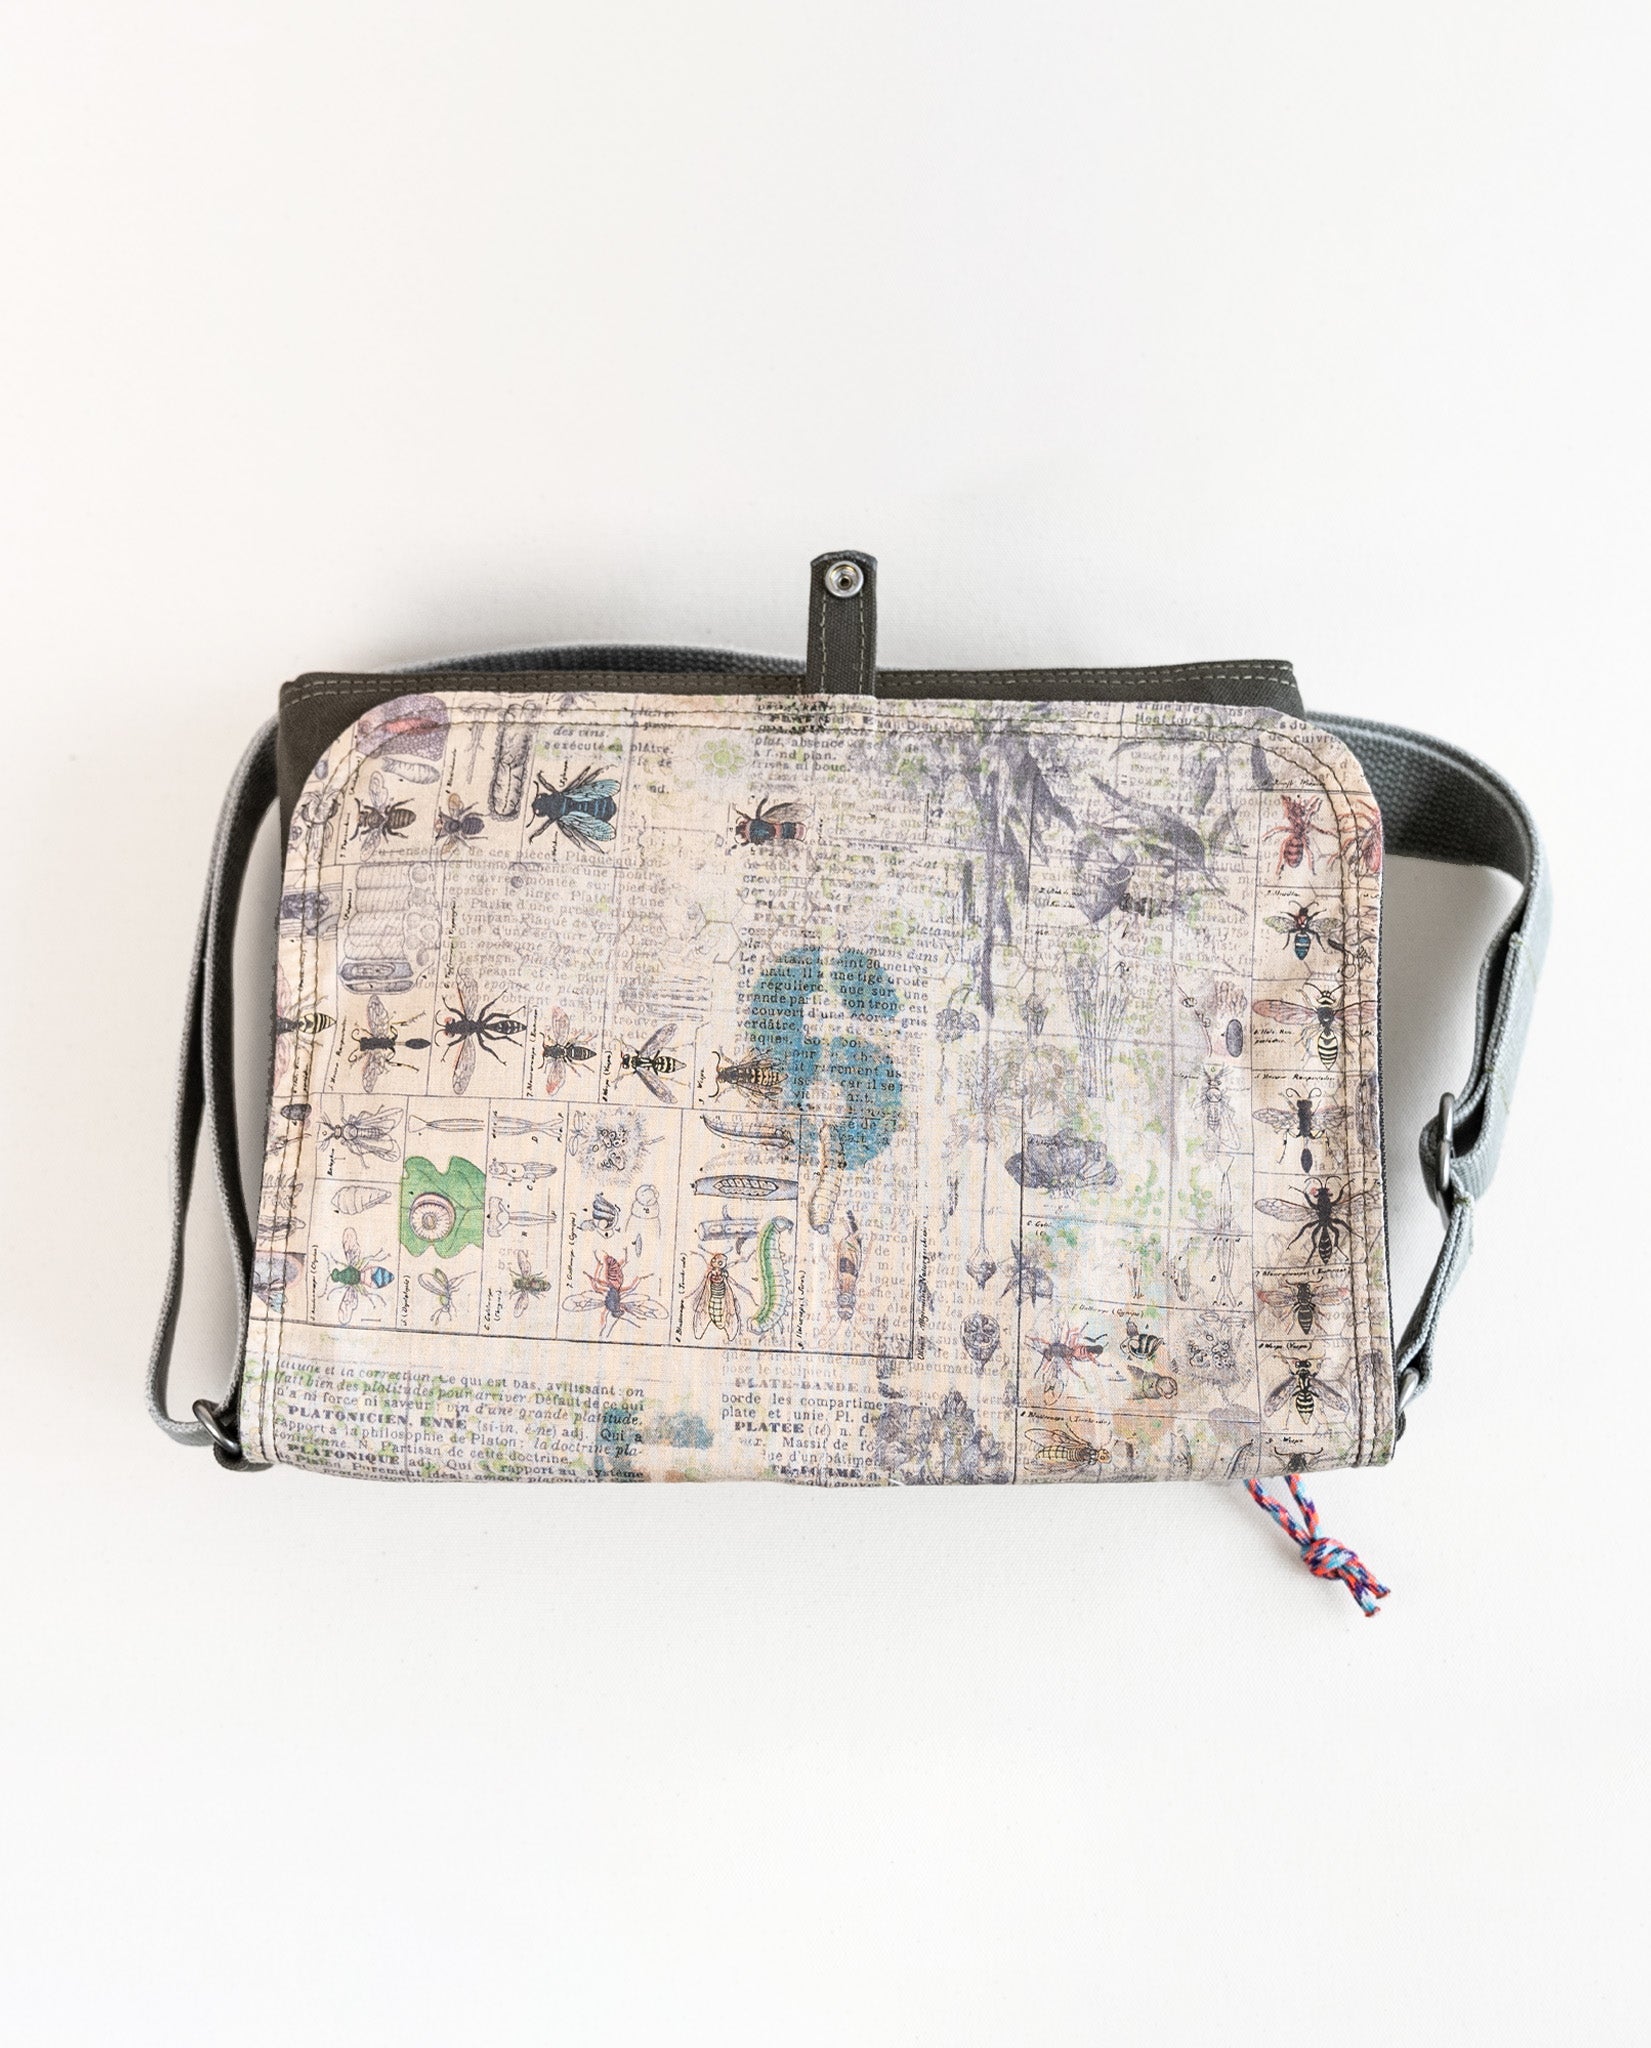 Inside of flap showing entomology print lining fabric of Dock 5’s Snowy Owl Canvas Messenger Bag in olive featuring art from owner Natalija Walbridge